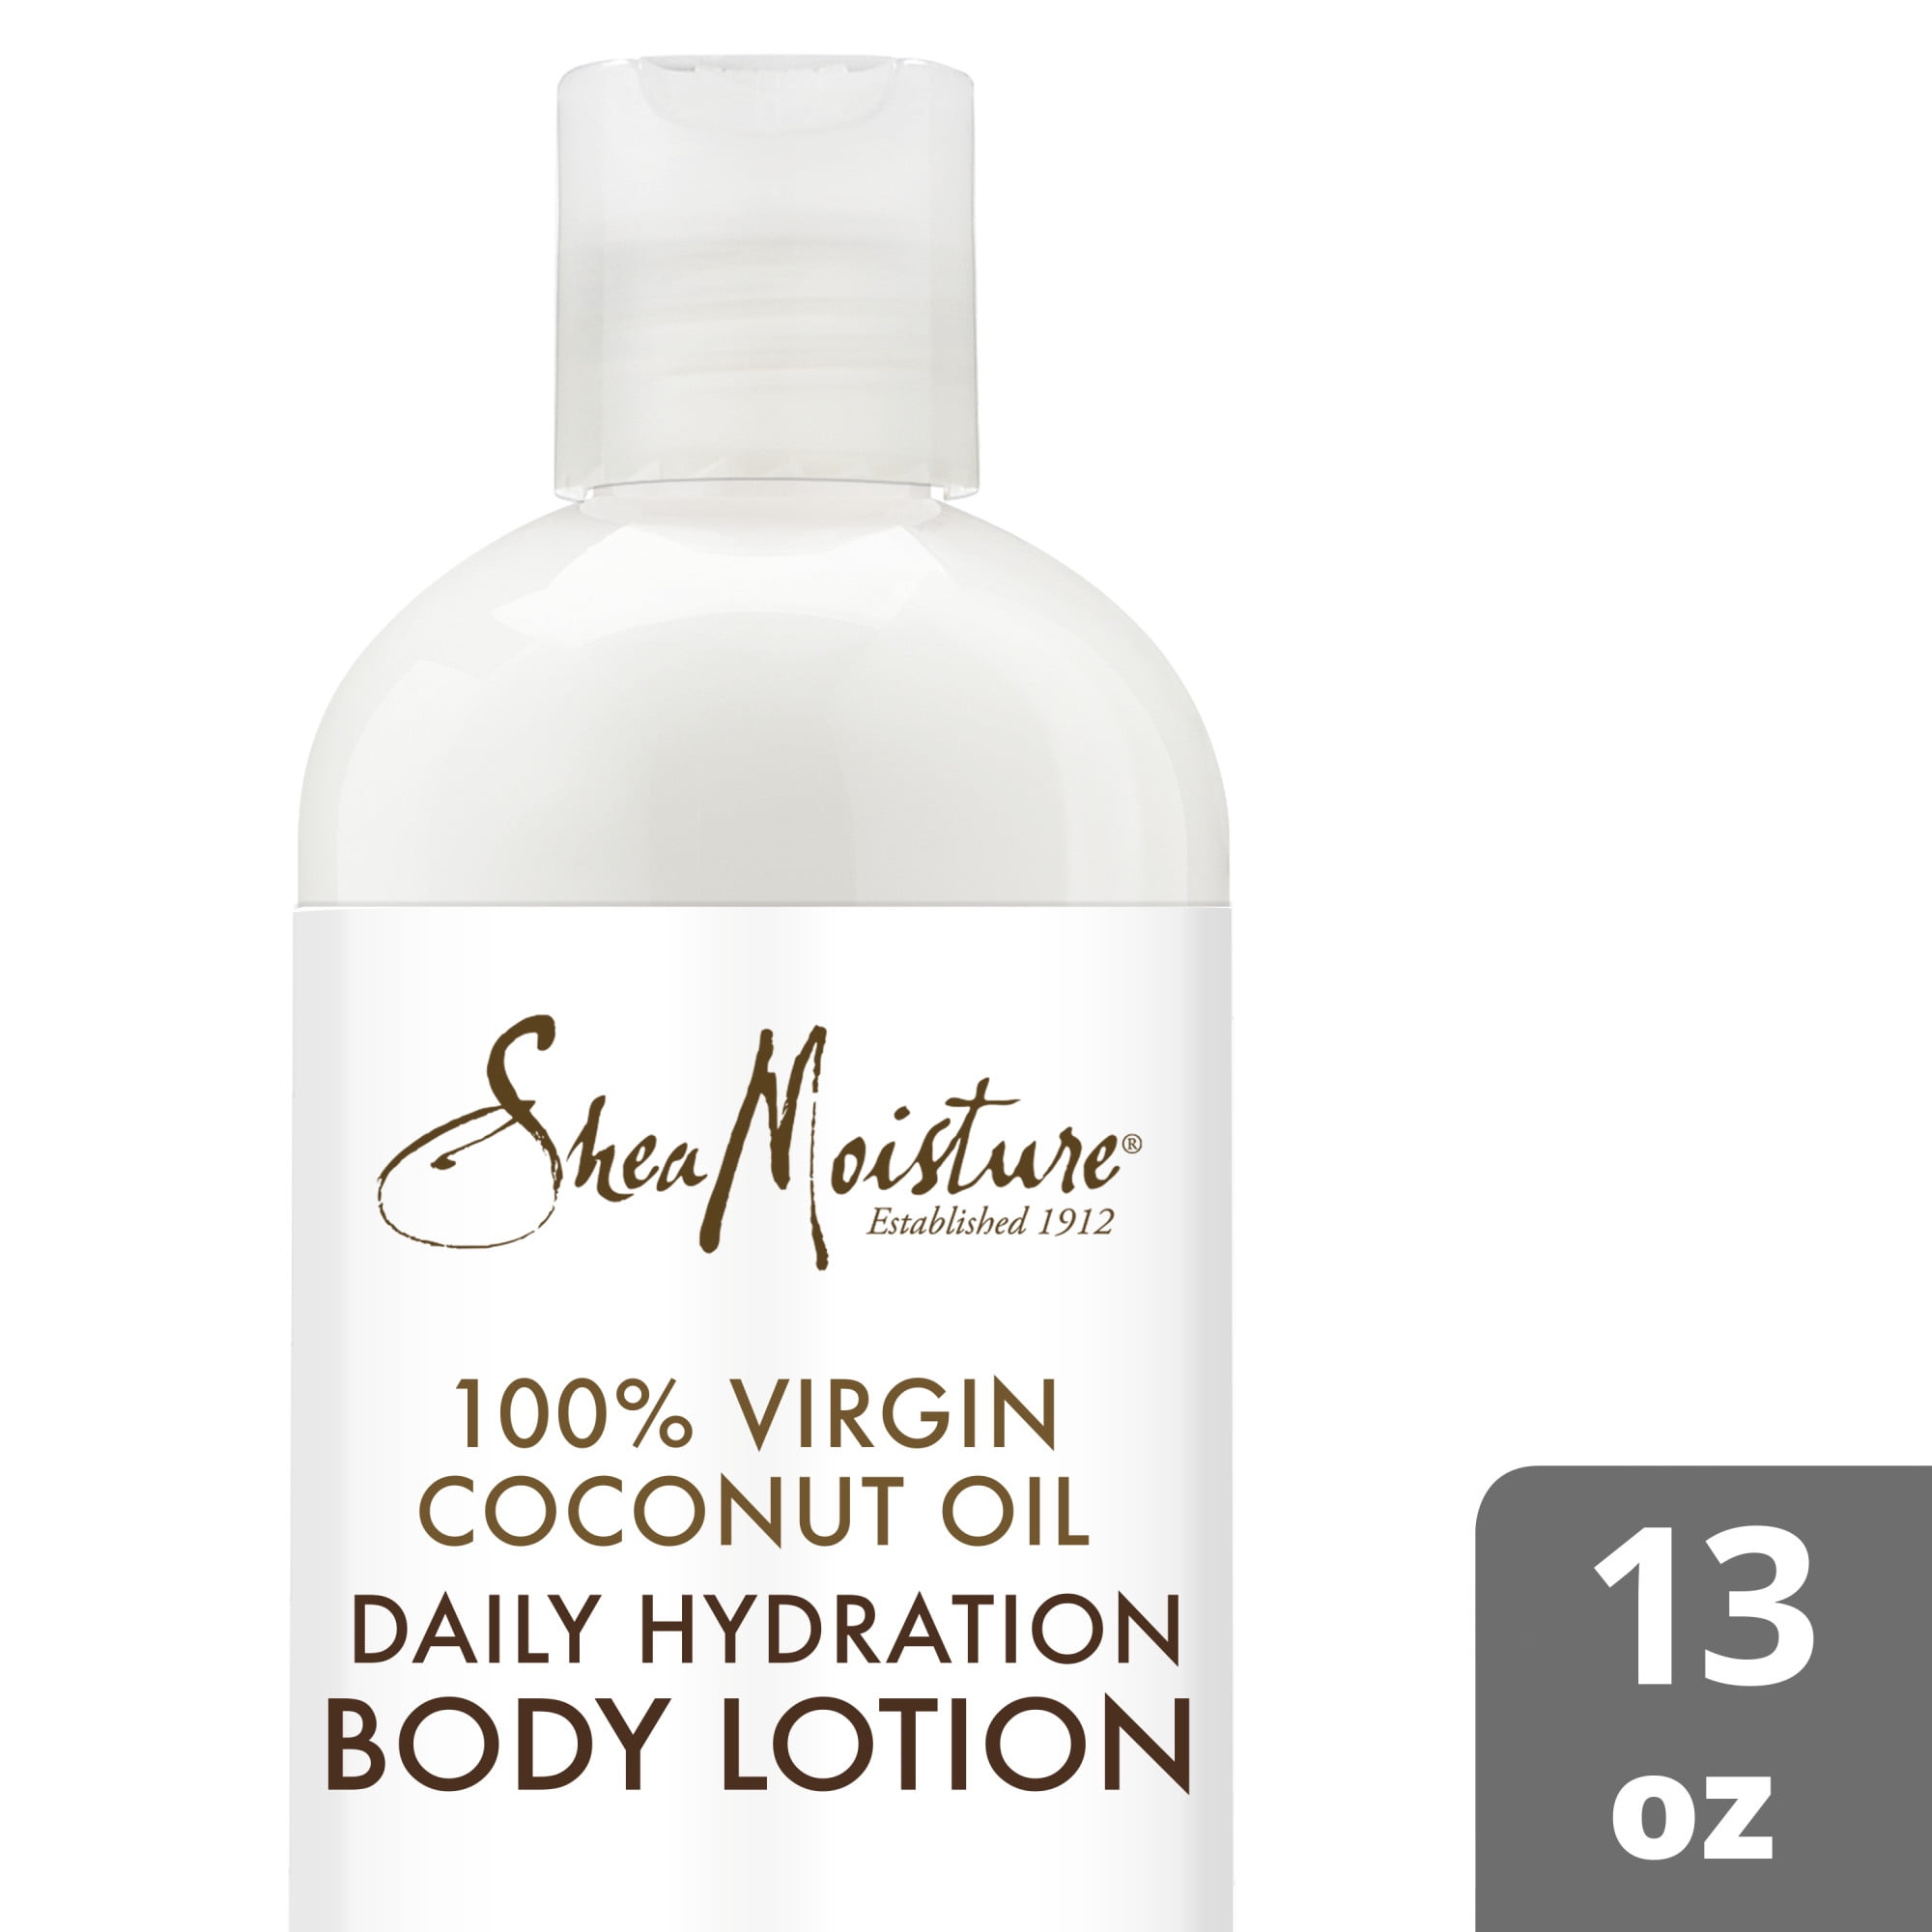 100percent Virgin Coconut Oil Daily Hydration Body Lotion by Shea Moisture for Unisex - 13 oz Body Lotion